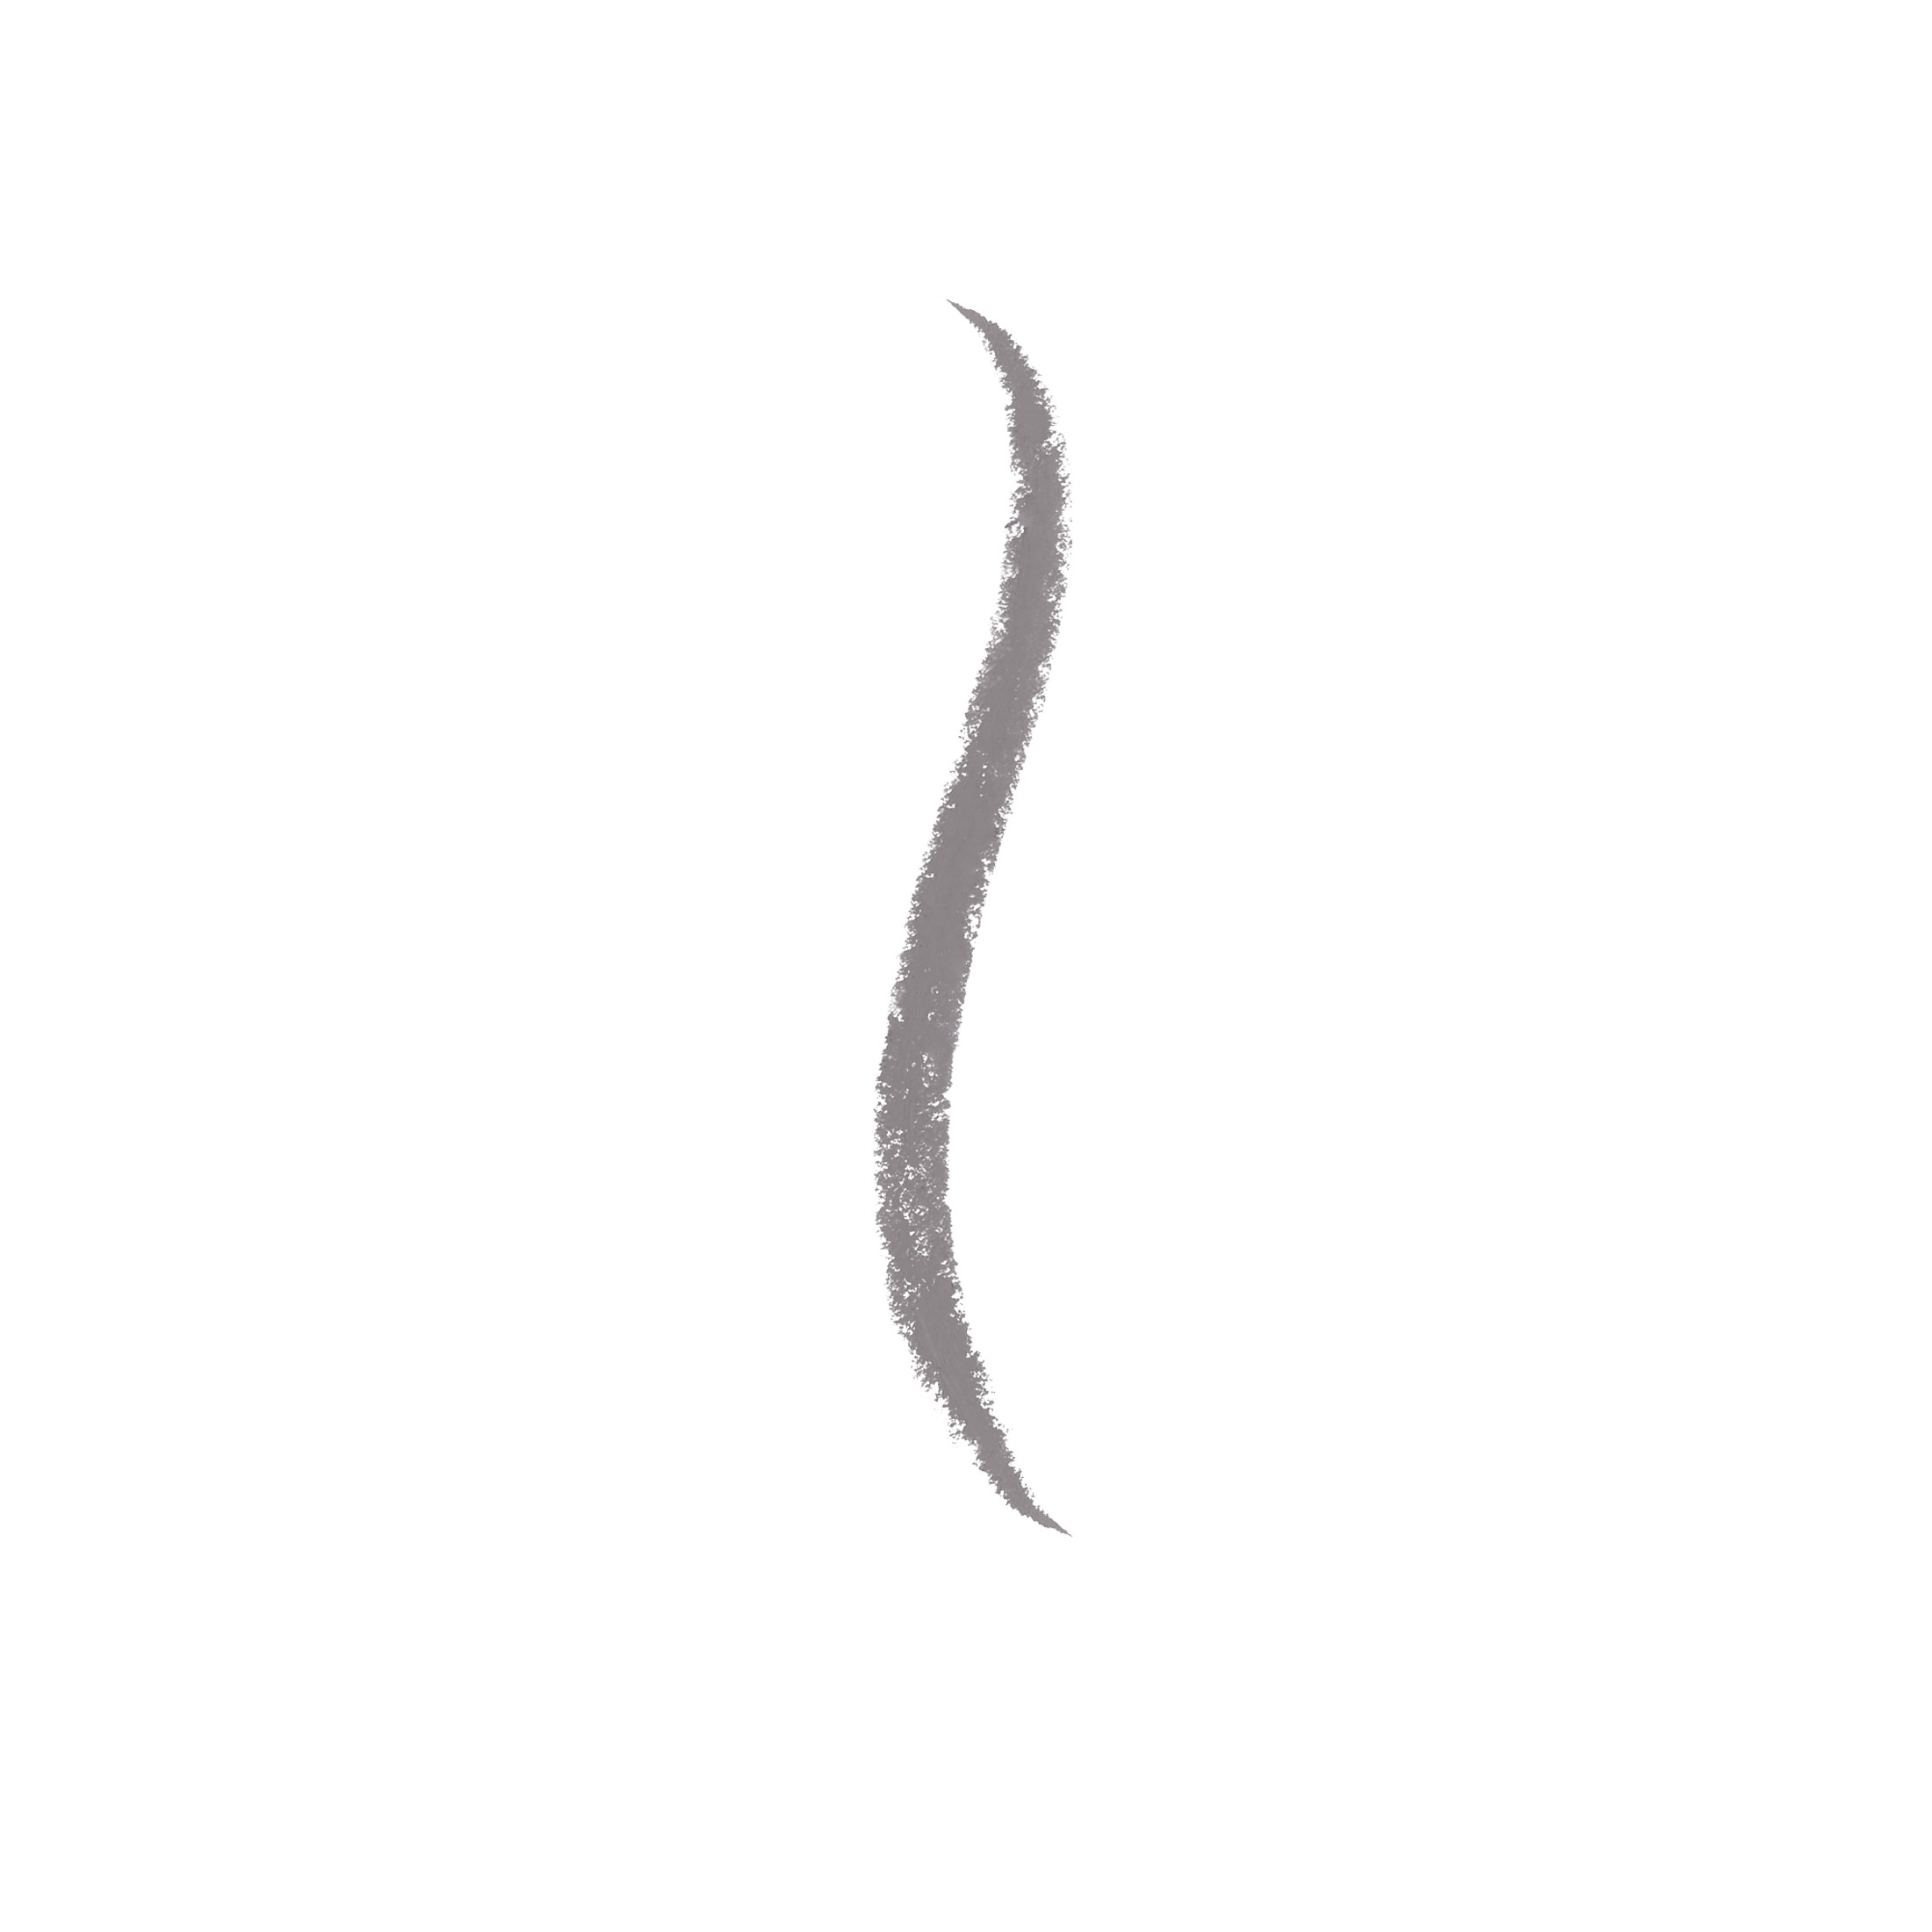 COVERGIRL Perfect Blend Eyeliner Pencil, 105 Charcoal Neutral, 0.03 oz - image 2 of 7